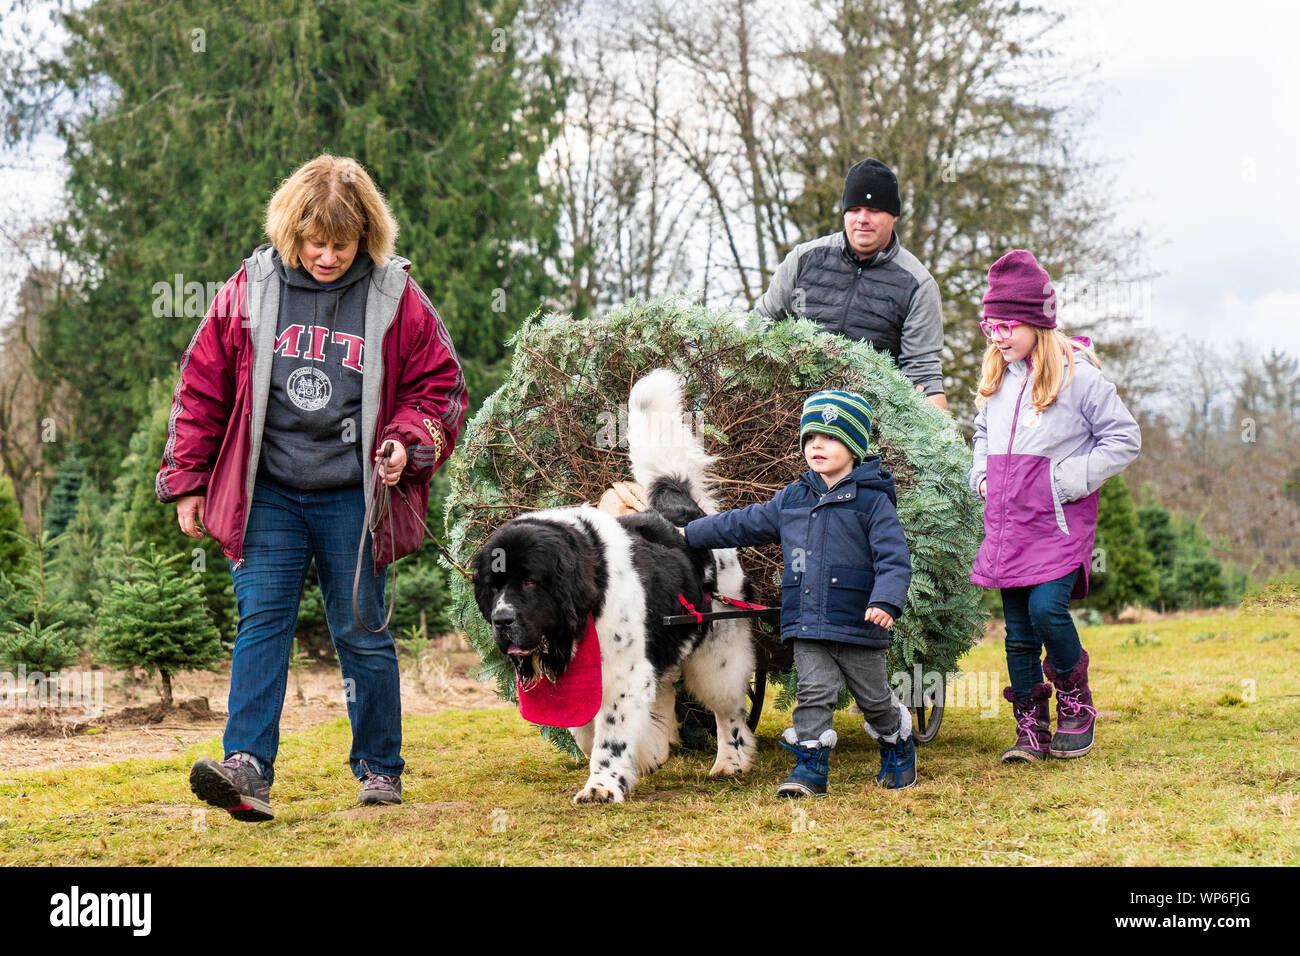 Newfoundland dog pulling Christmas Tree from field for family. Stock Photo